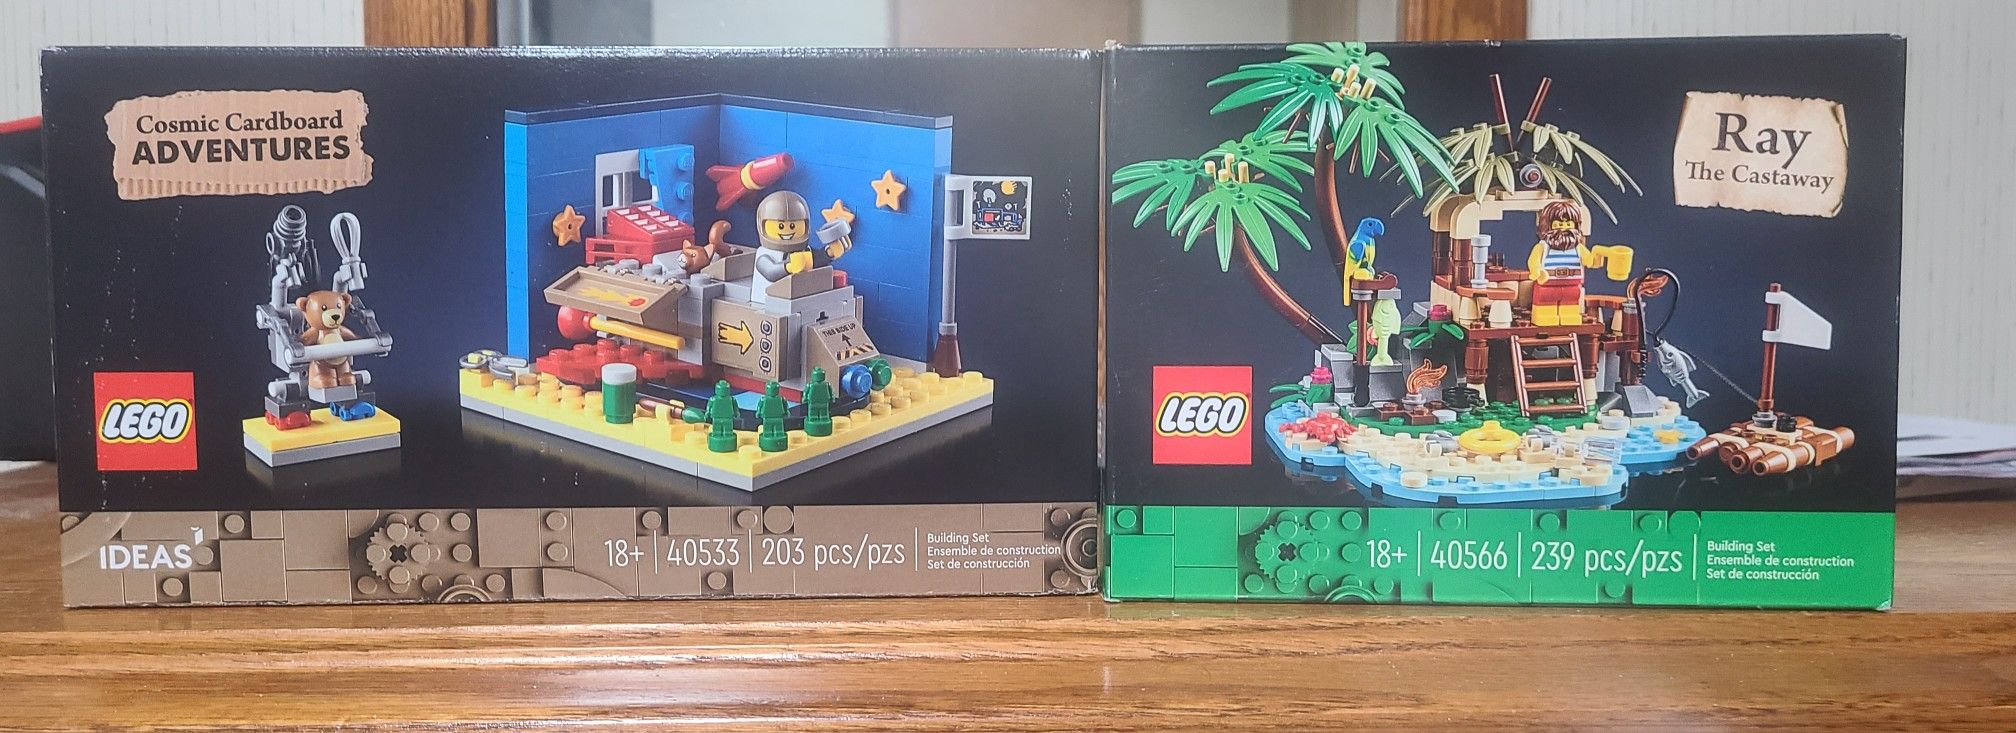 LEGO SETS 40533 AND 40566